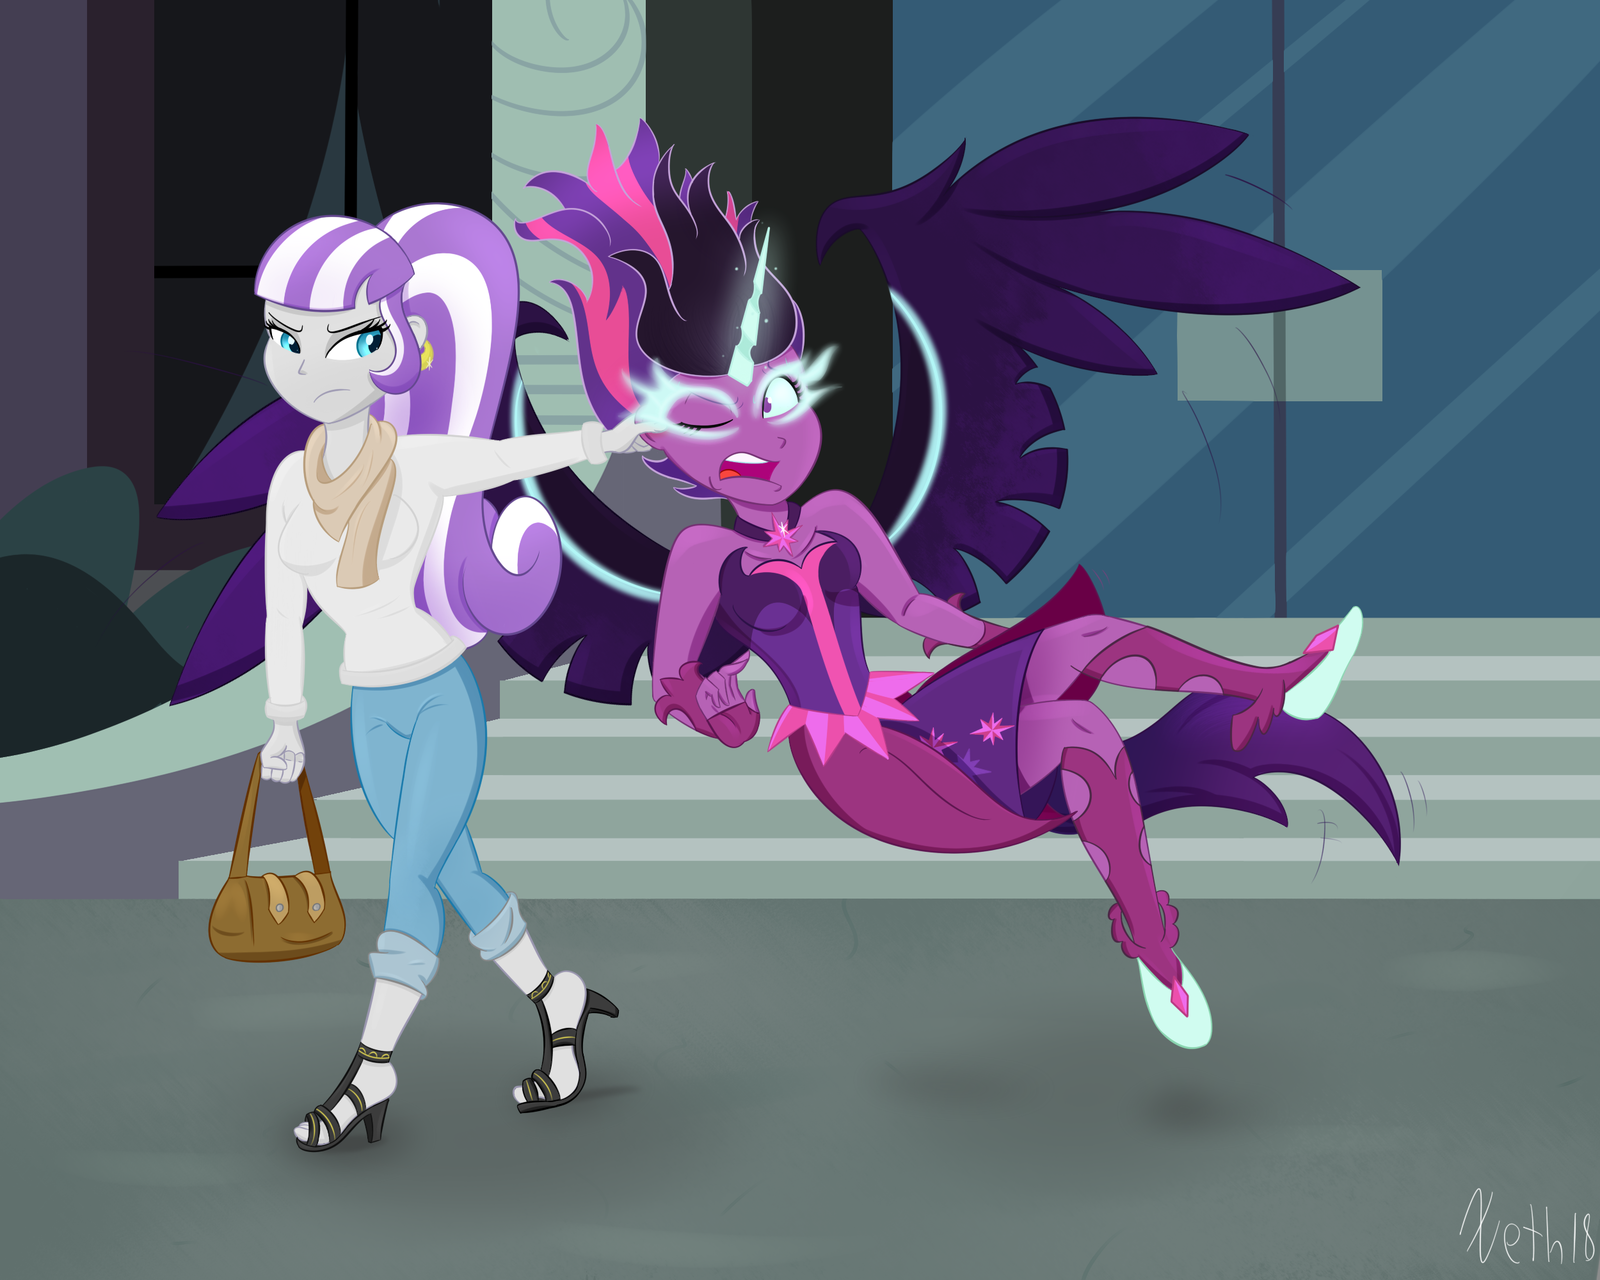 Young lady, you are punished! - My little pony, Equestria girls, Twilight sparkle, Twilight Velvet, Midnight sparkle